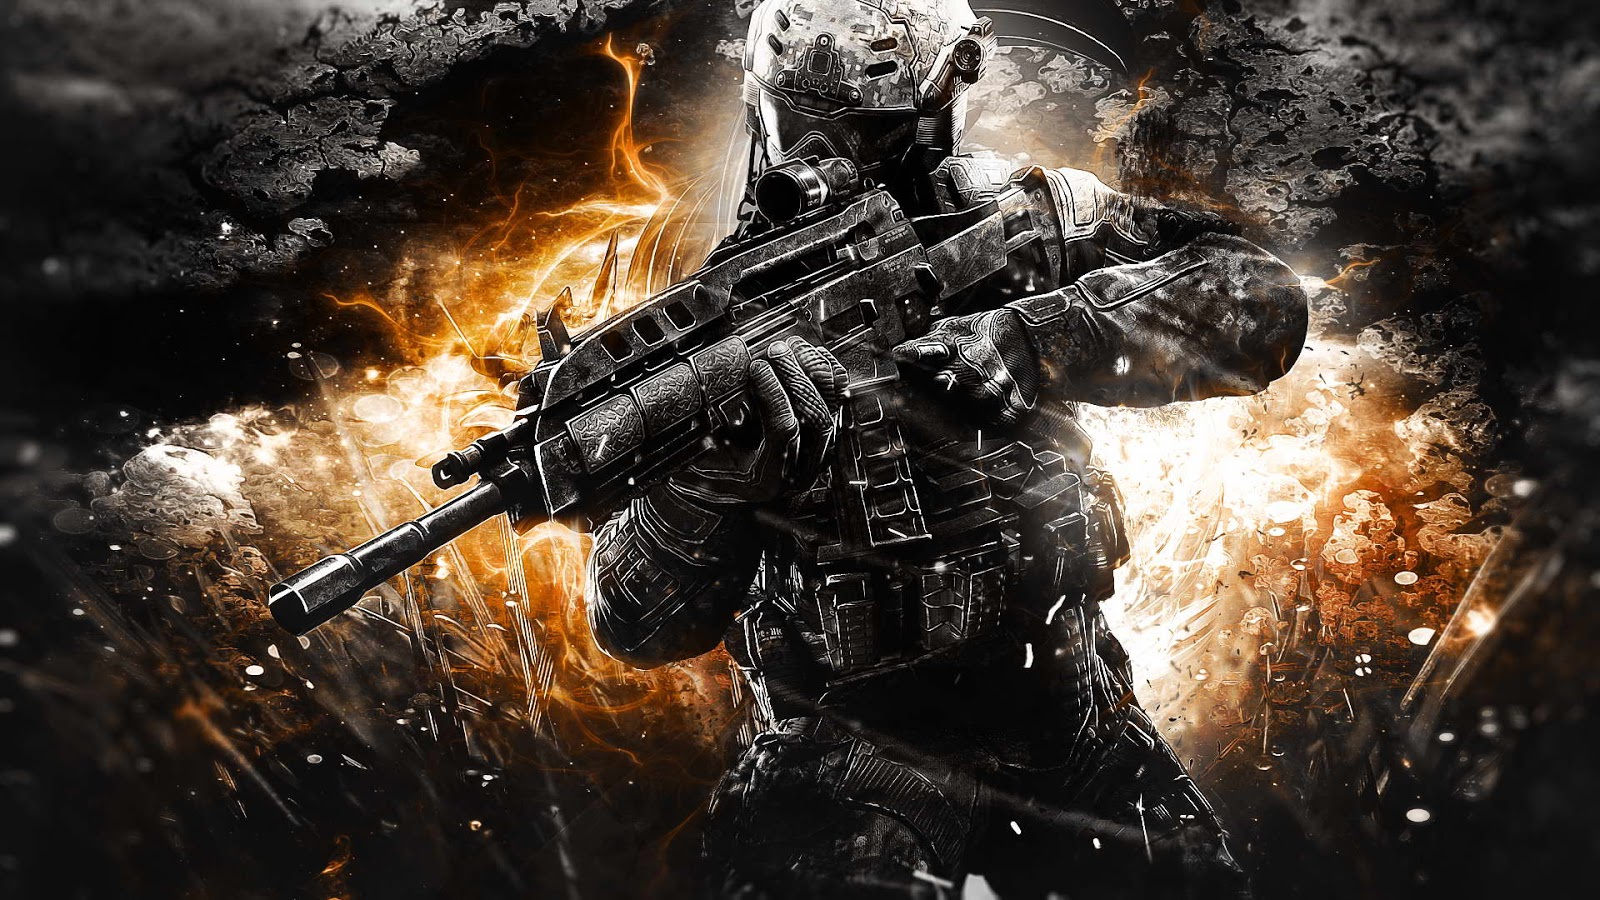 Call Of Duty Zombies Wallpapercod Black Ops Wallpaper HD